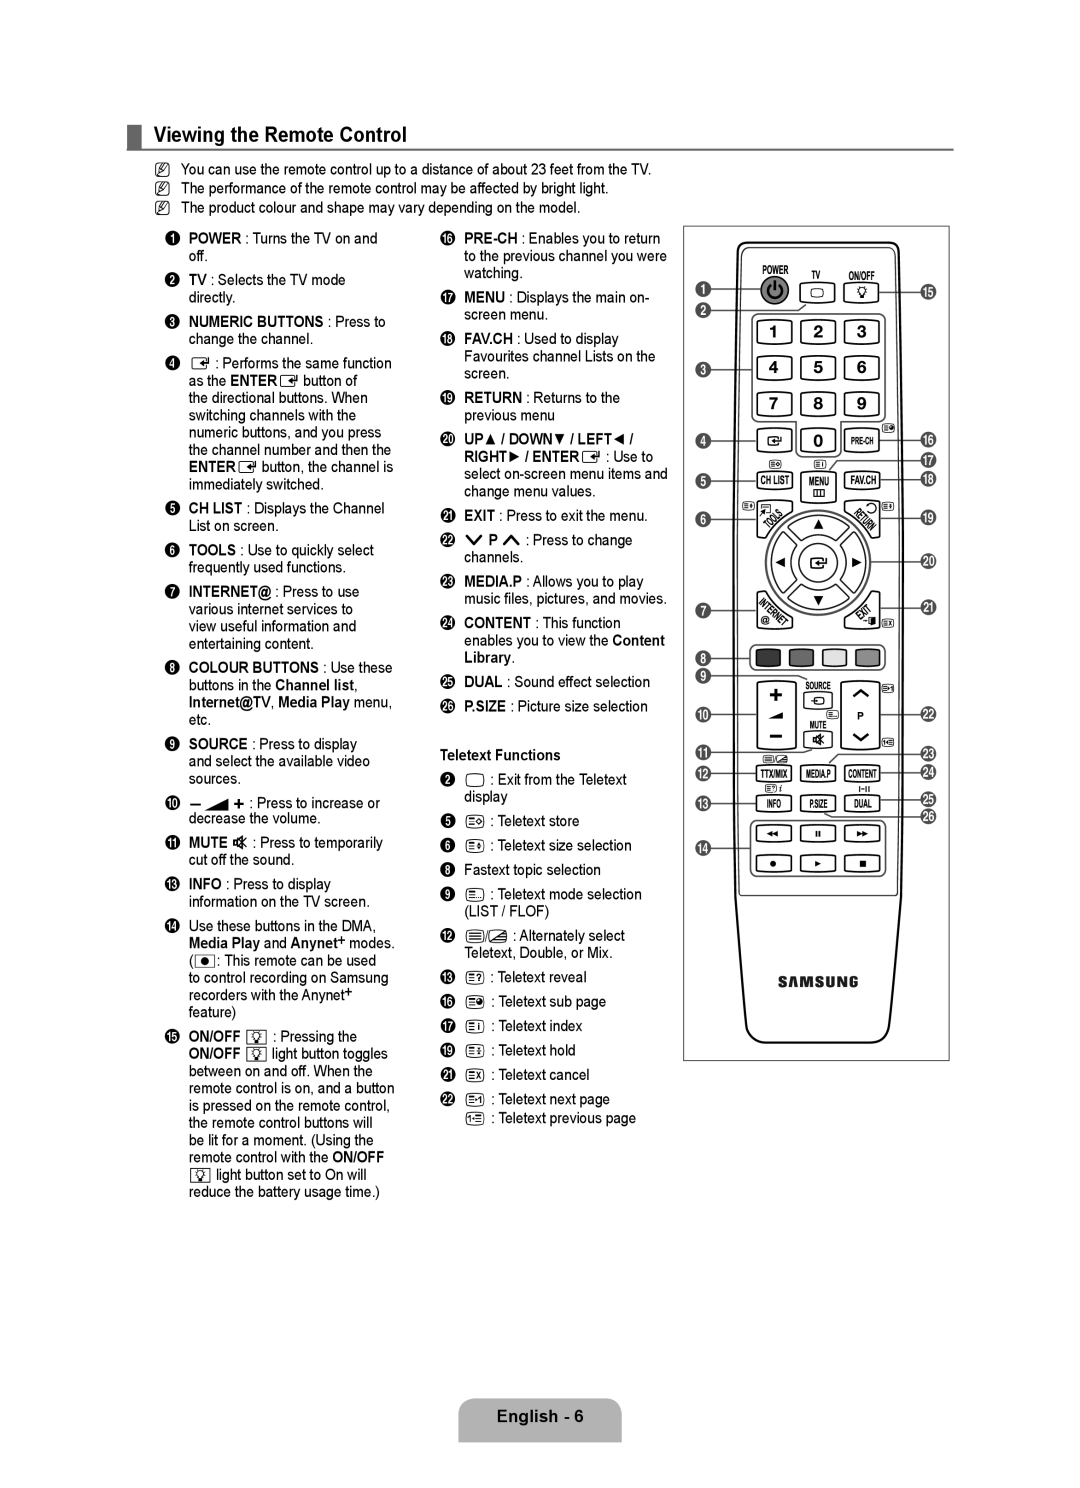 Samsung LA40B750U1R user manual Viewing the Remote Control, NUMERIC BUTTONS Press to change the channel, Teletext Functions 